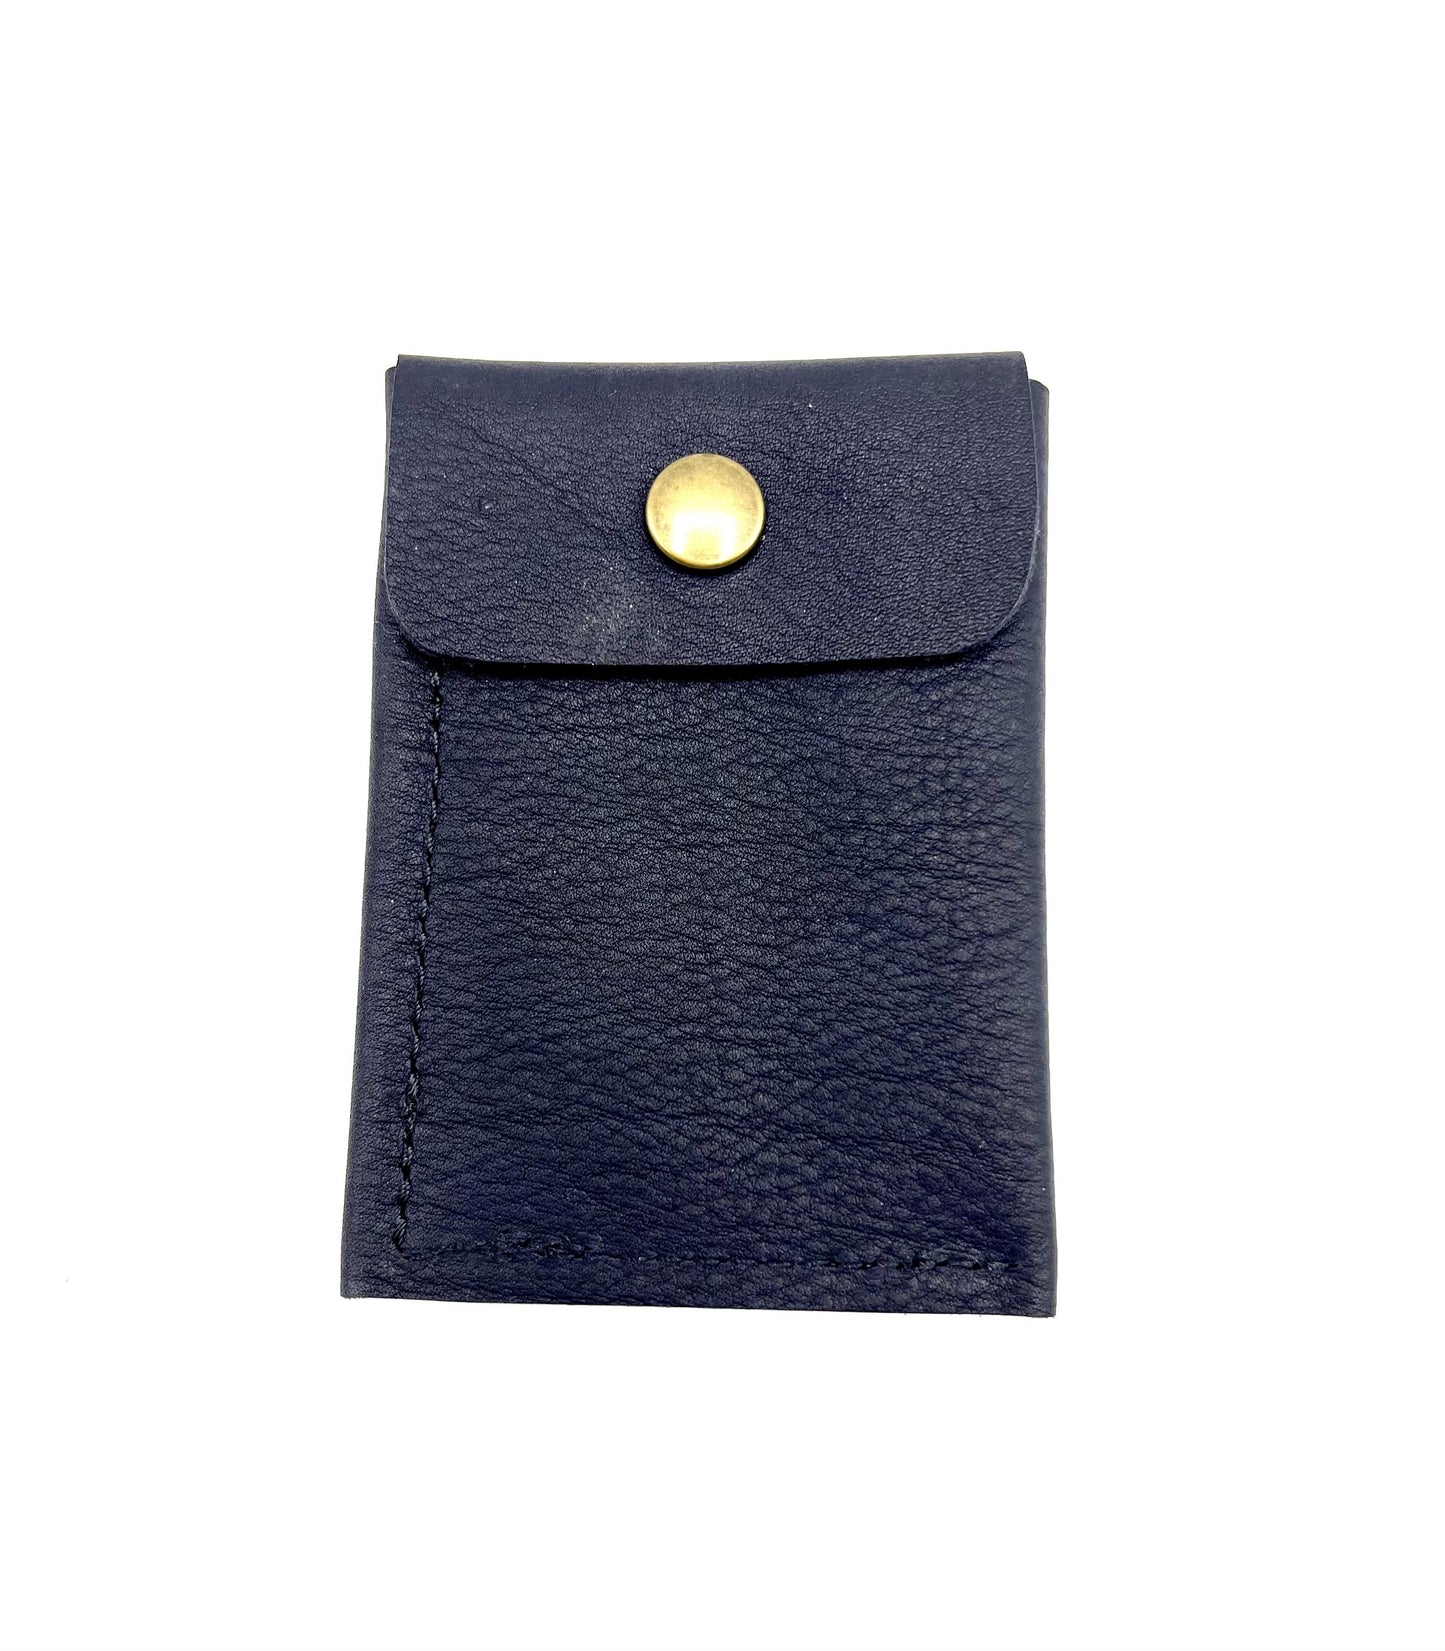 Load image into Gallery viewer, The back of the navy leather wallet showing the button closure for the coin purse.
